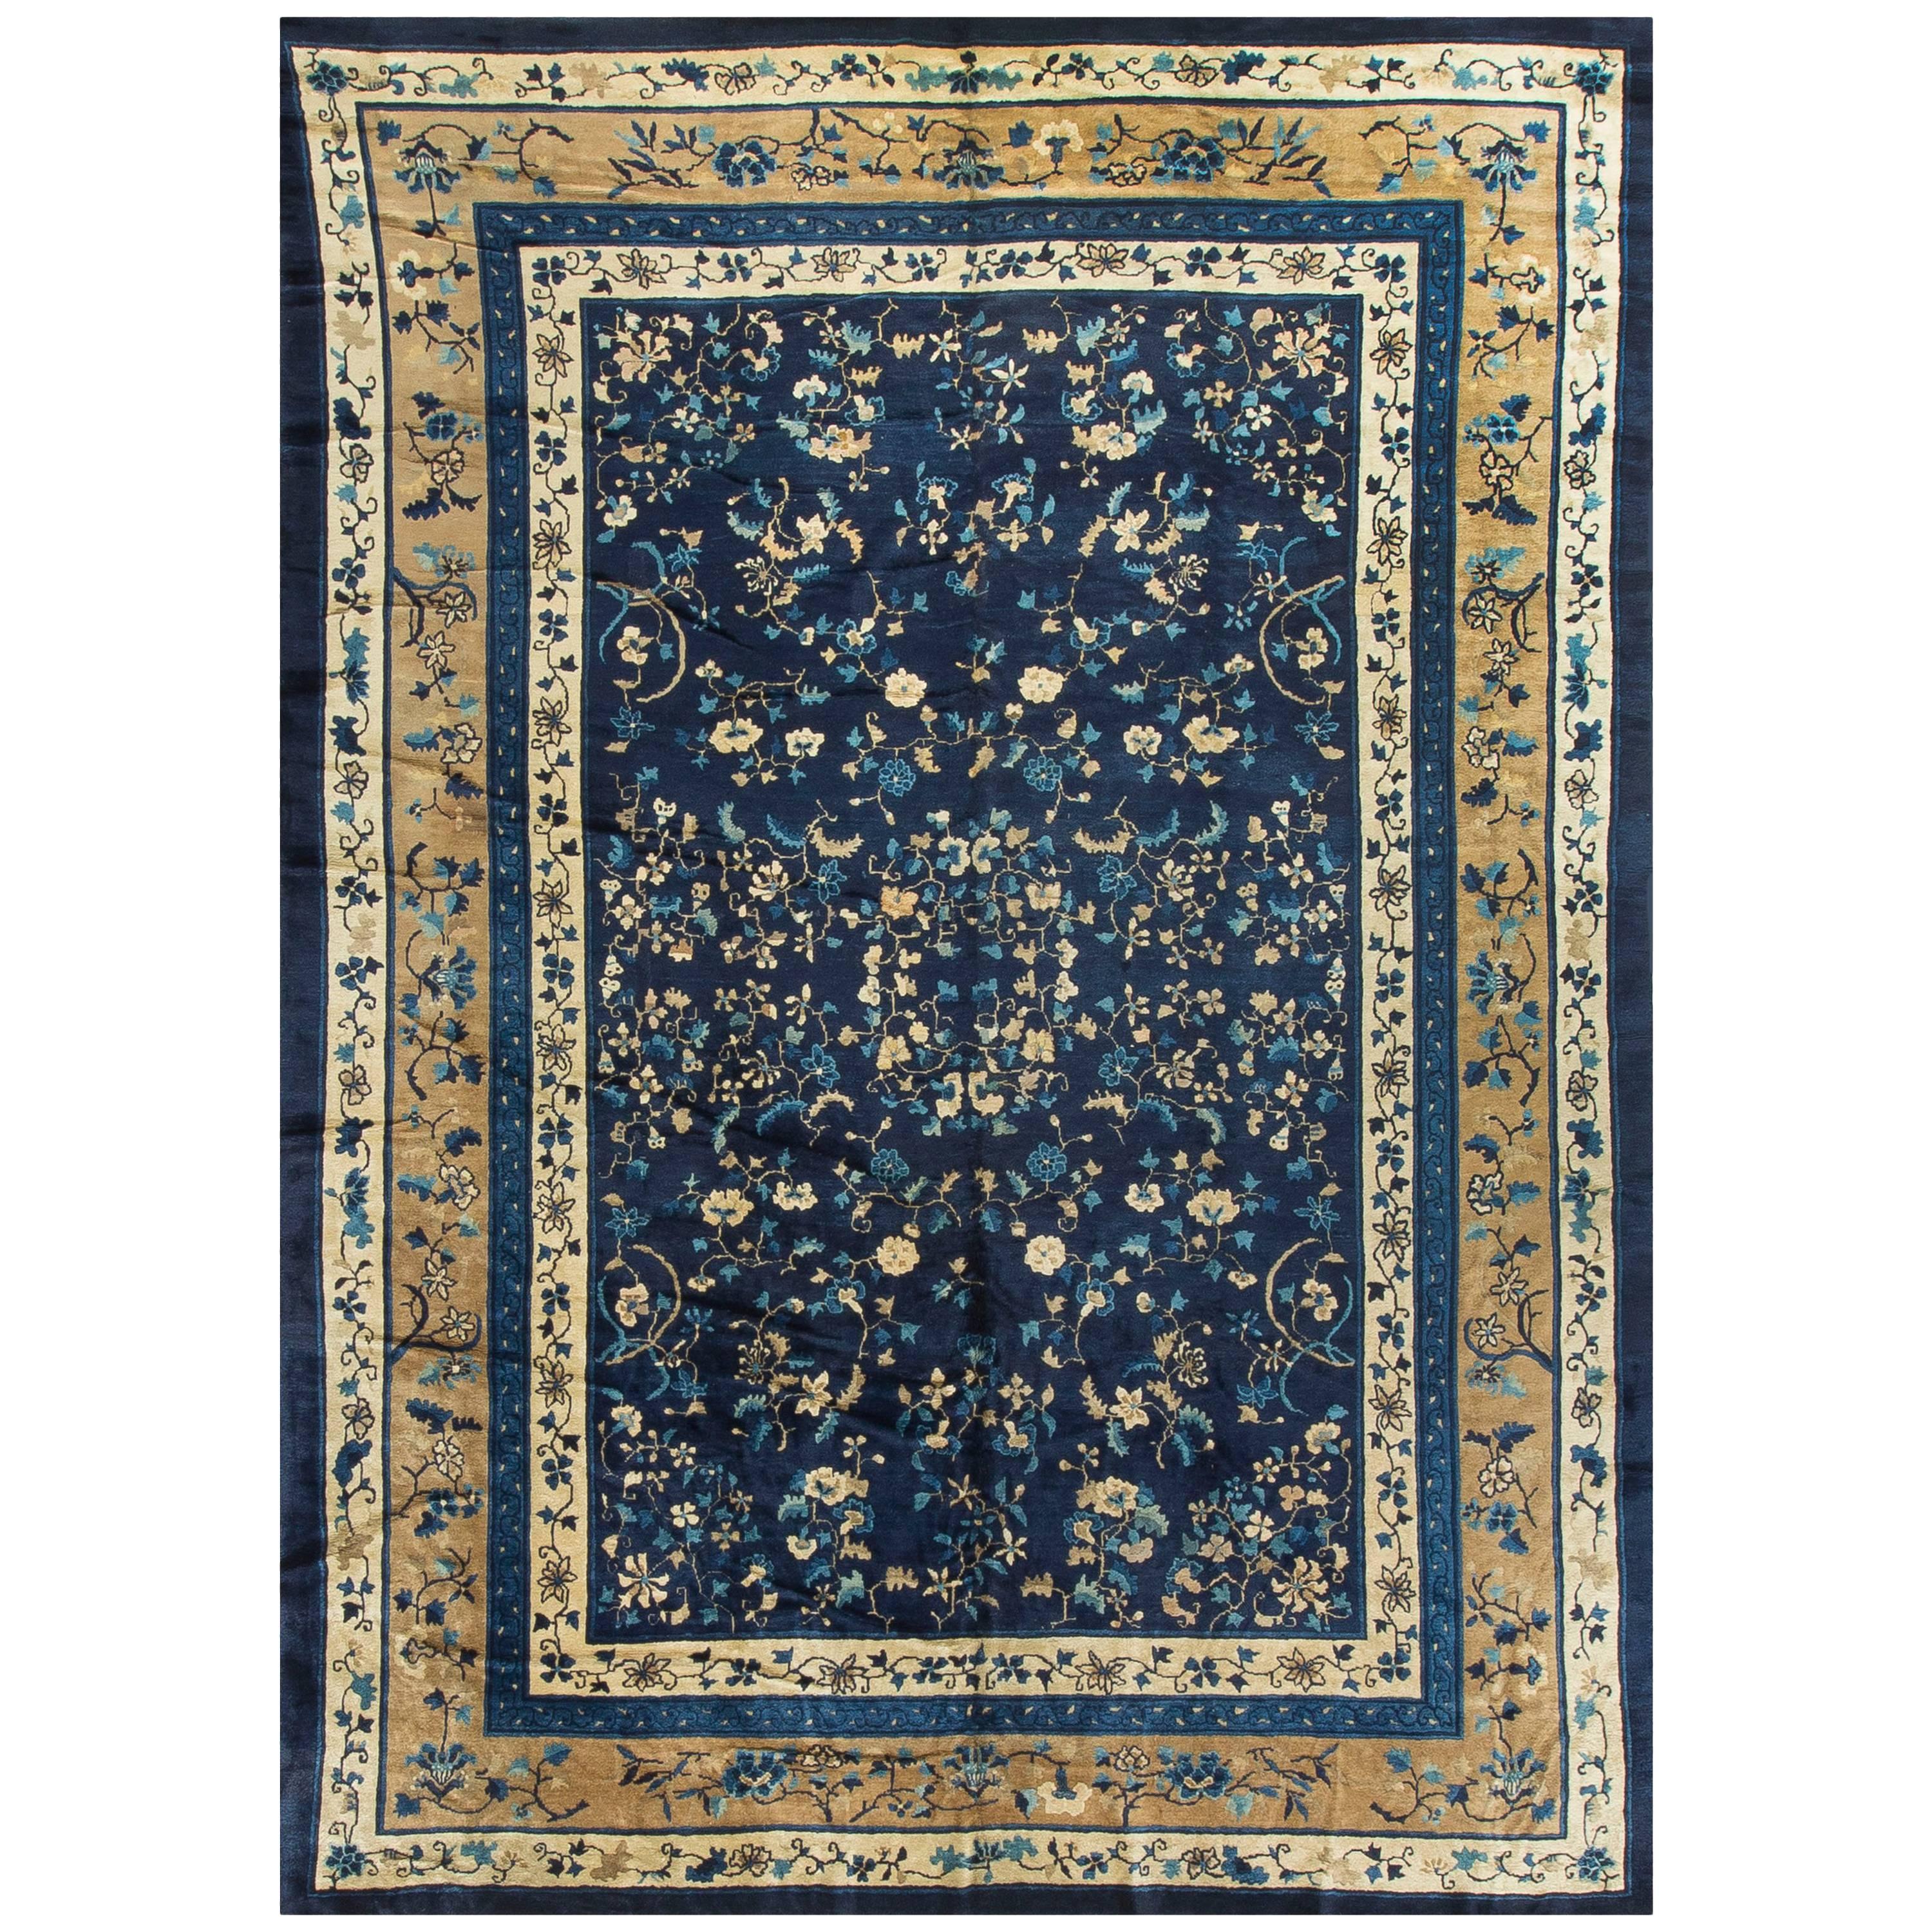 Vintage Chinese Rug Carpet Circa 1940 10'3 x 13'10 For Sale